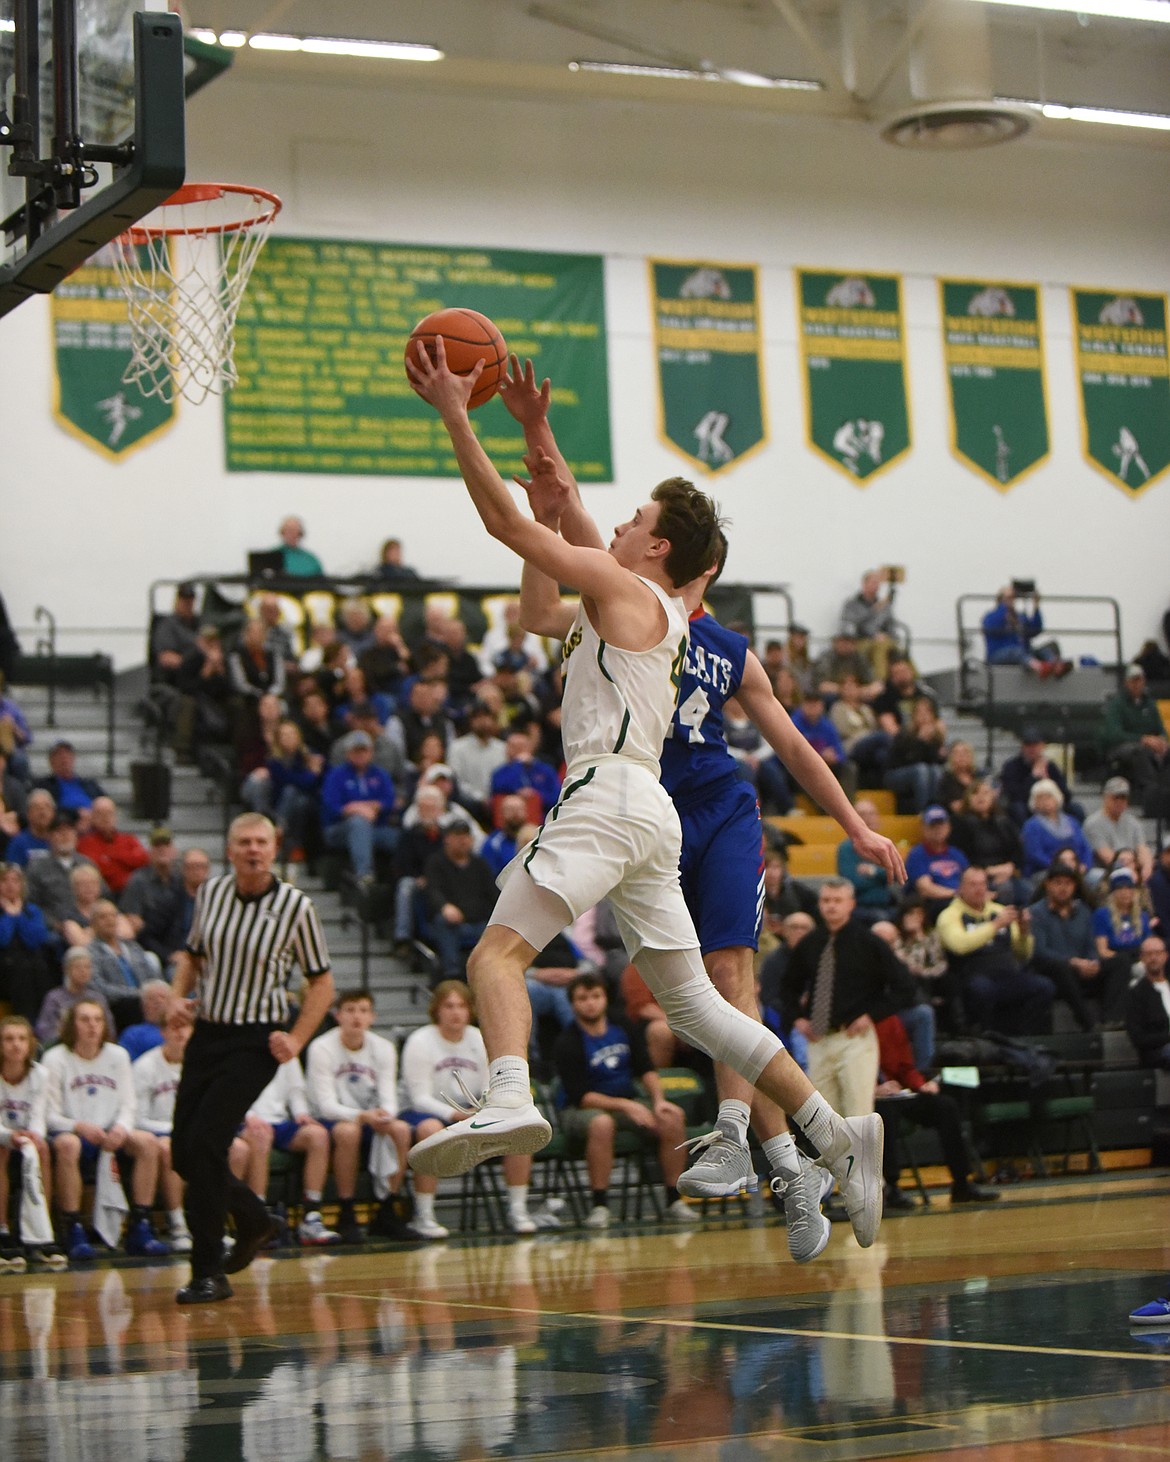 Bodie Smith skies for the layup during the Dogs’ Thursday night win over Columbia Falls. (Daniel McKay/Whitefish Pilot)